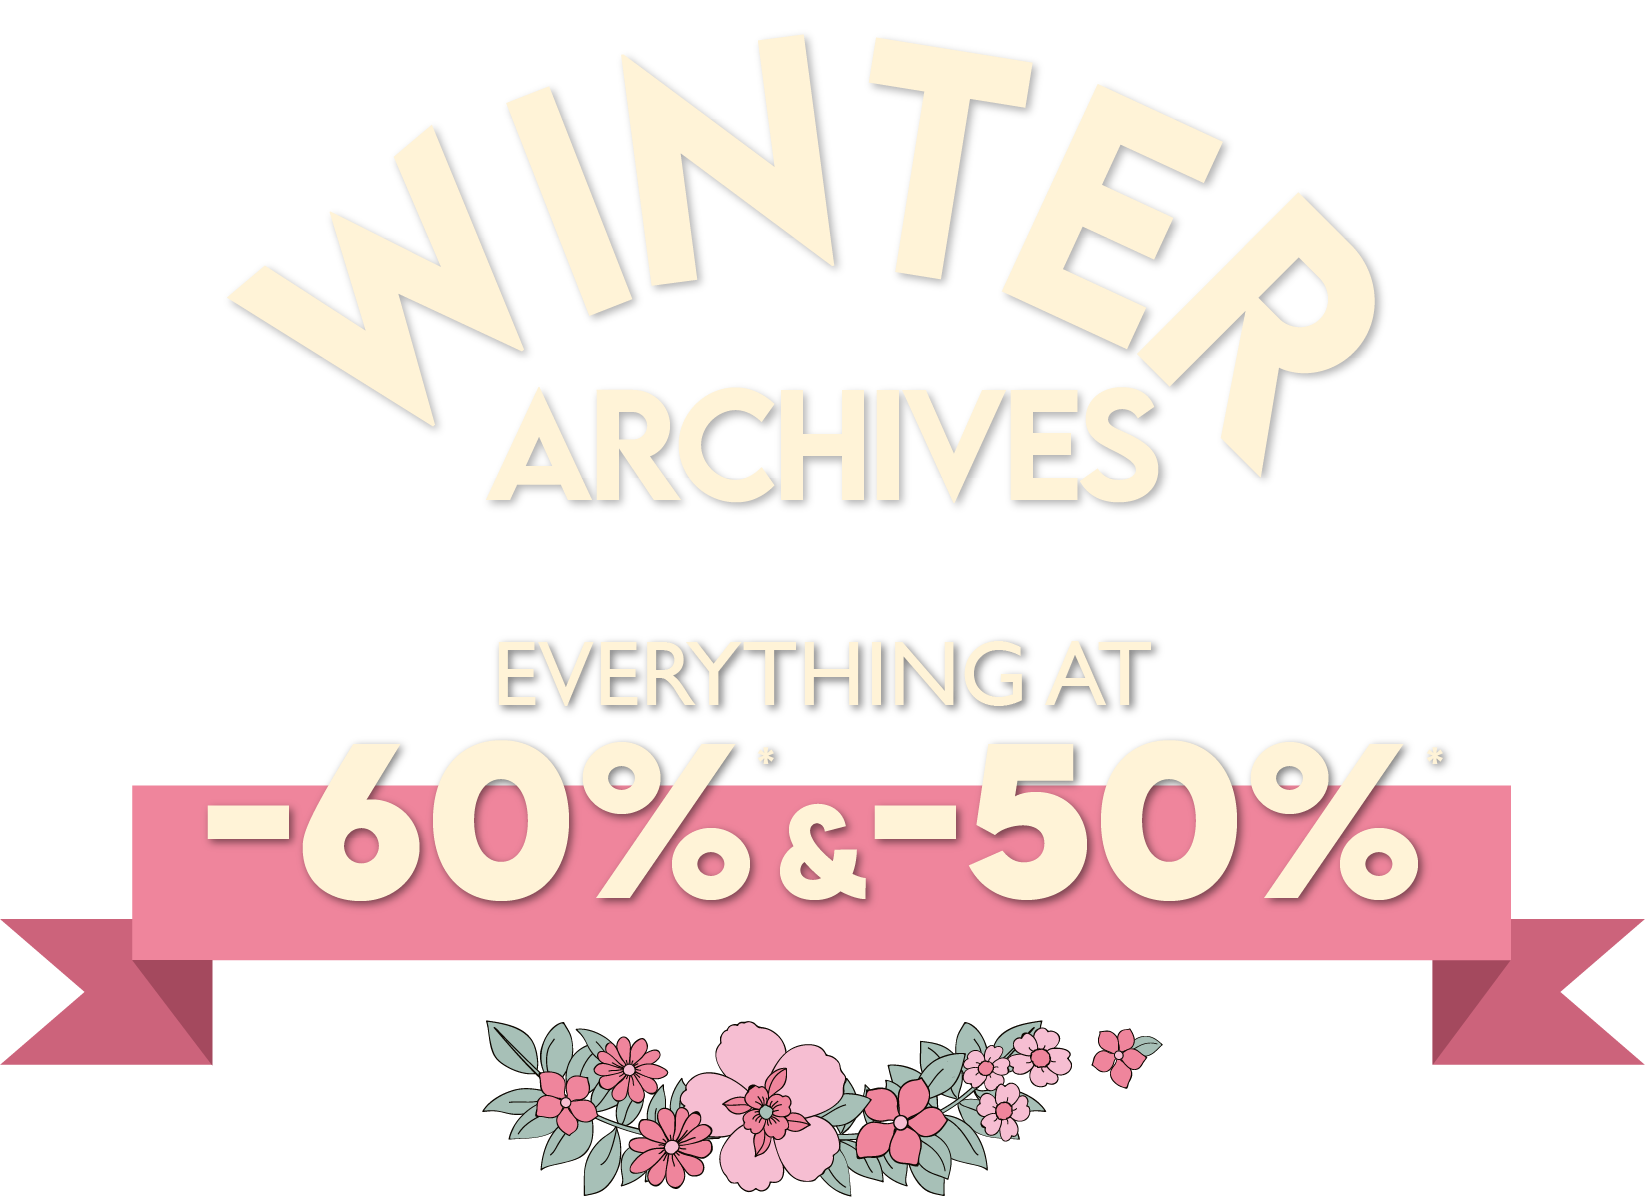 Sergent Major - winter archives : everything at -60% & -50%